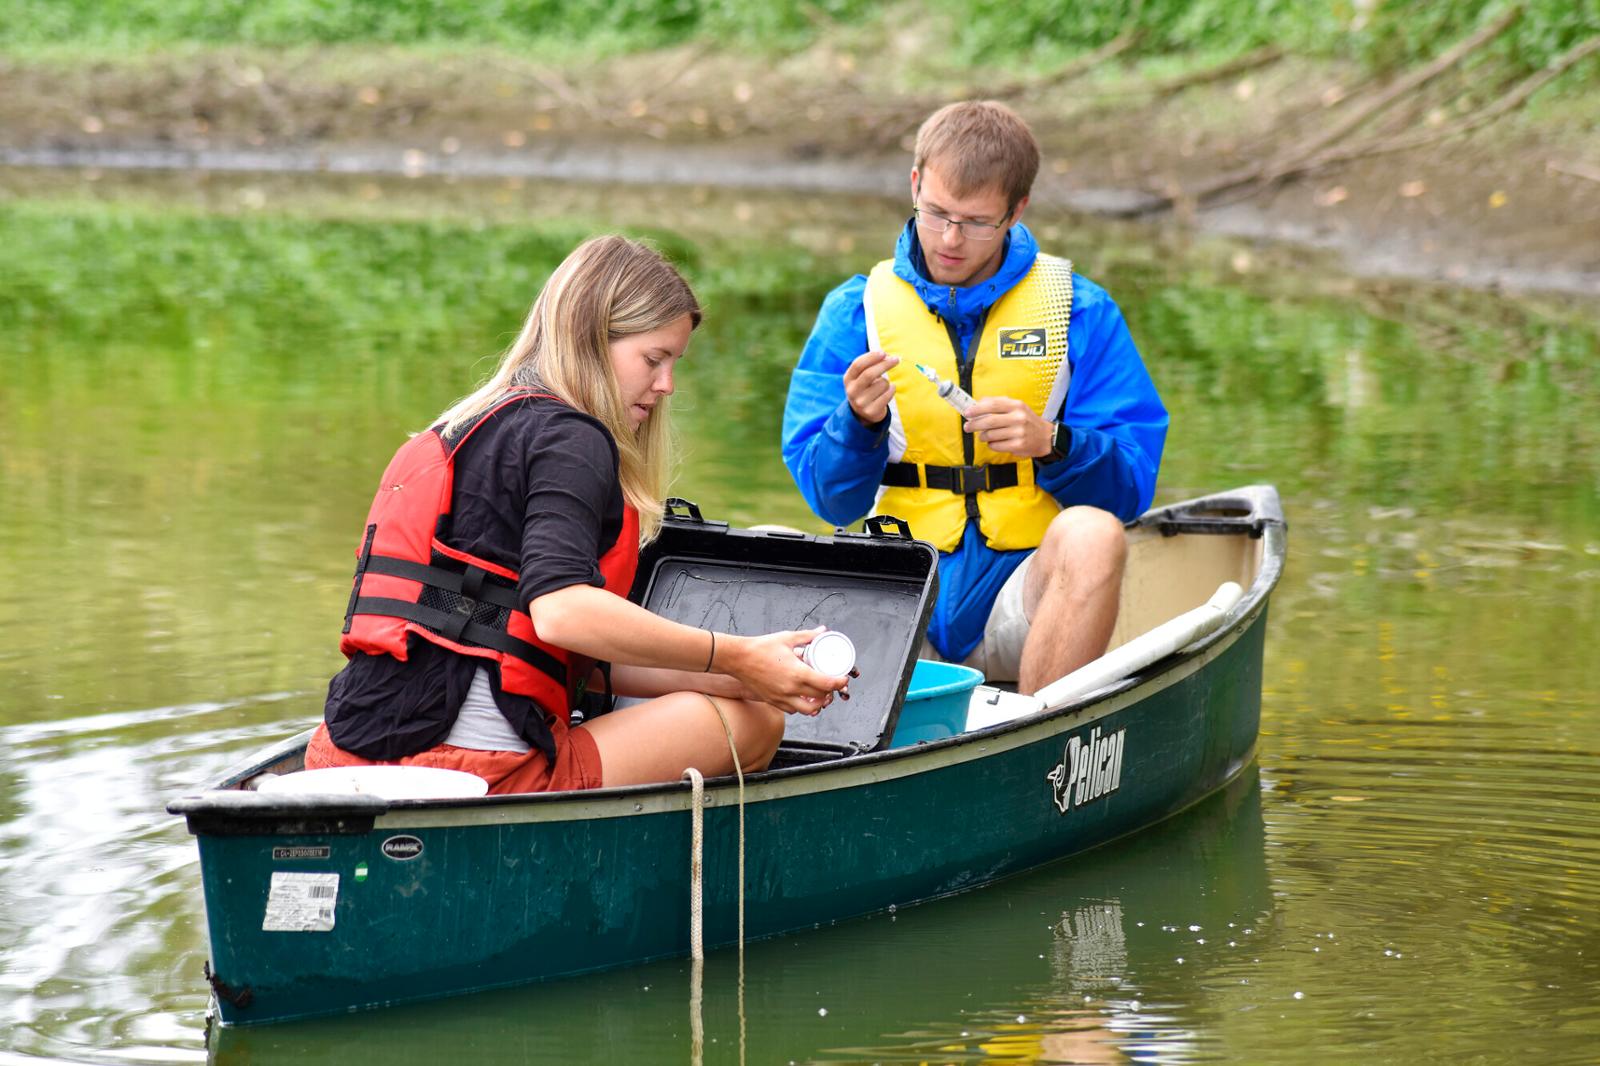 Two people in a canoe taking water samples from lake.